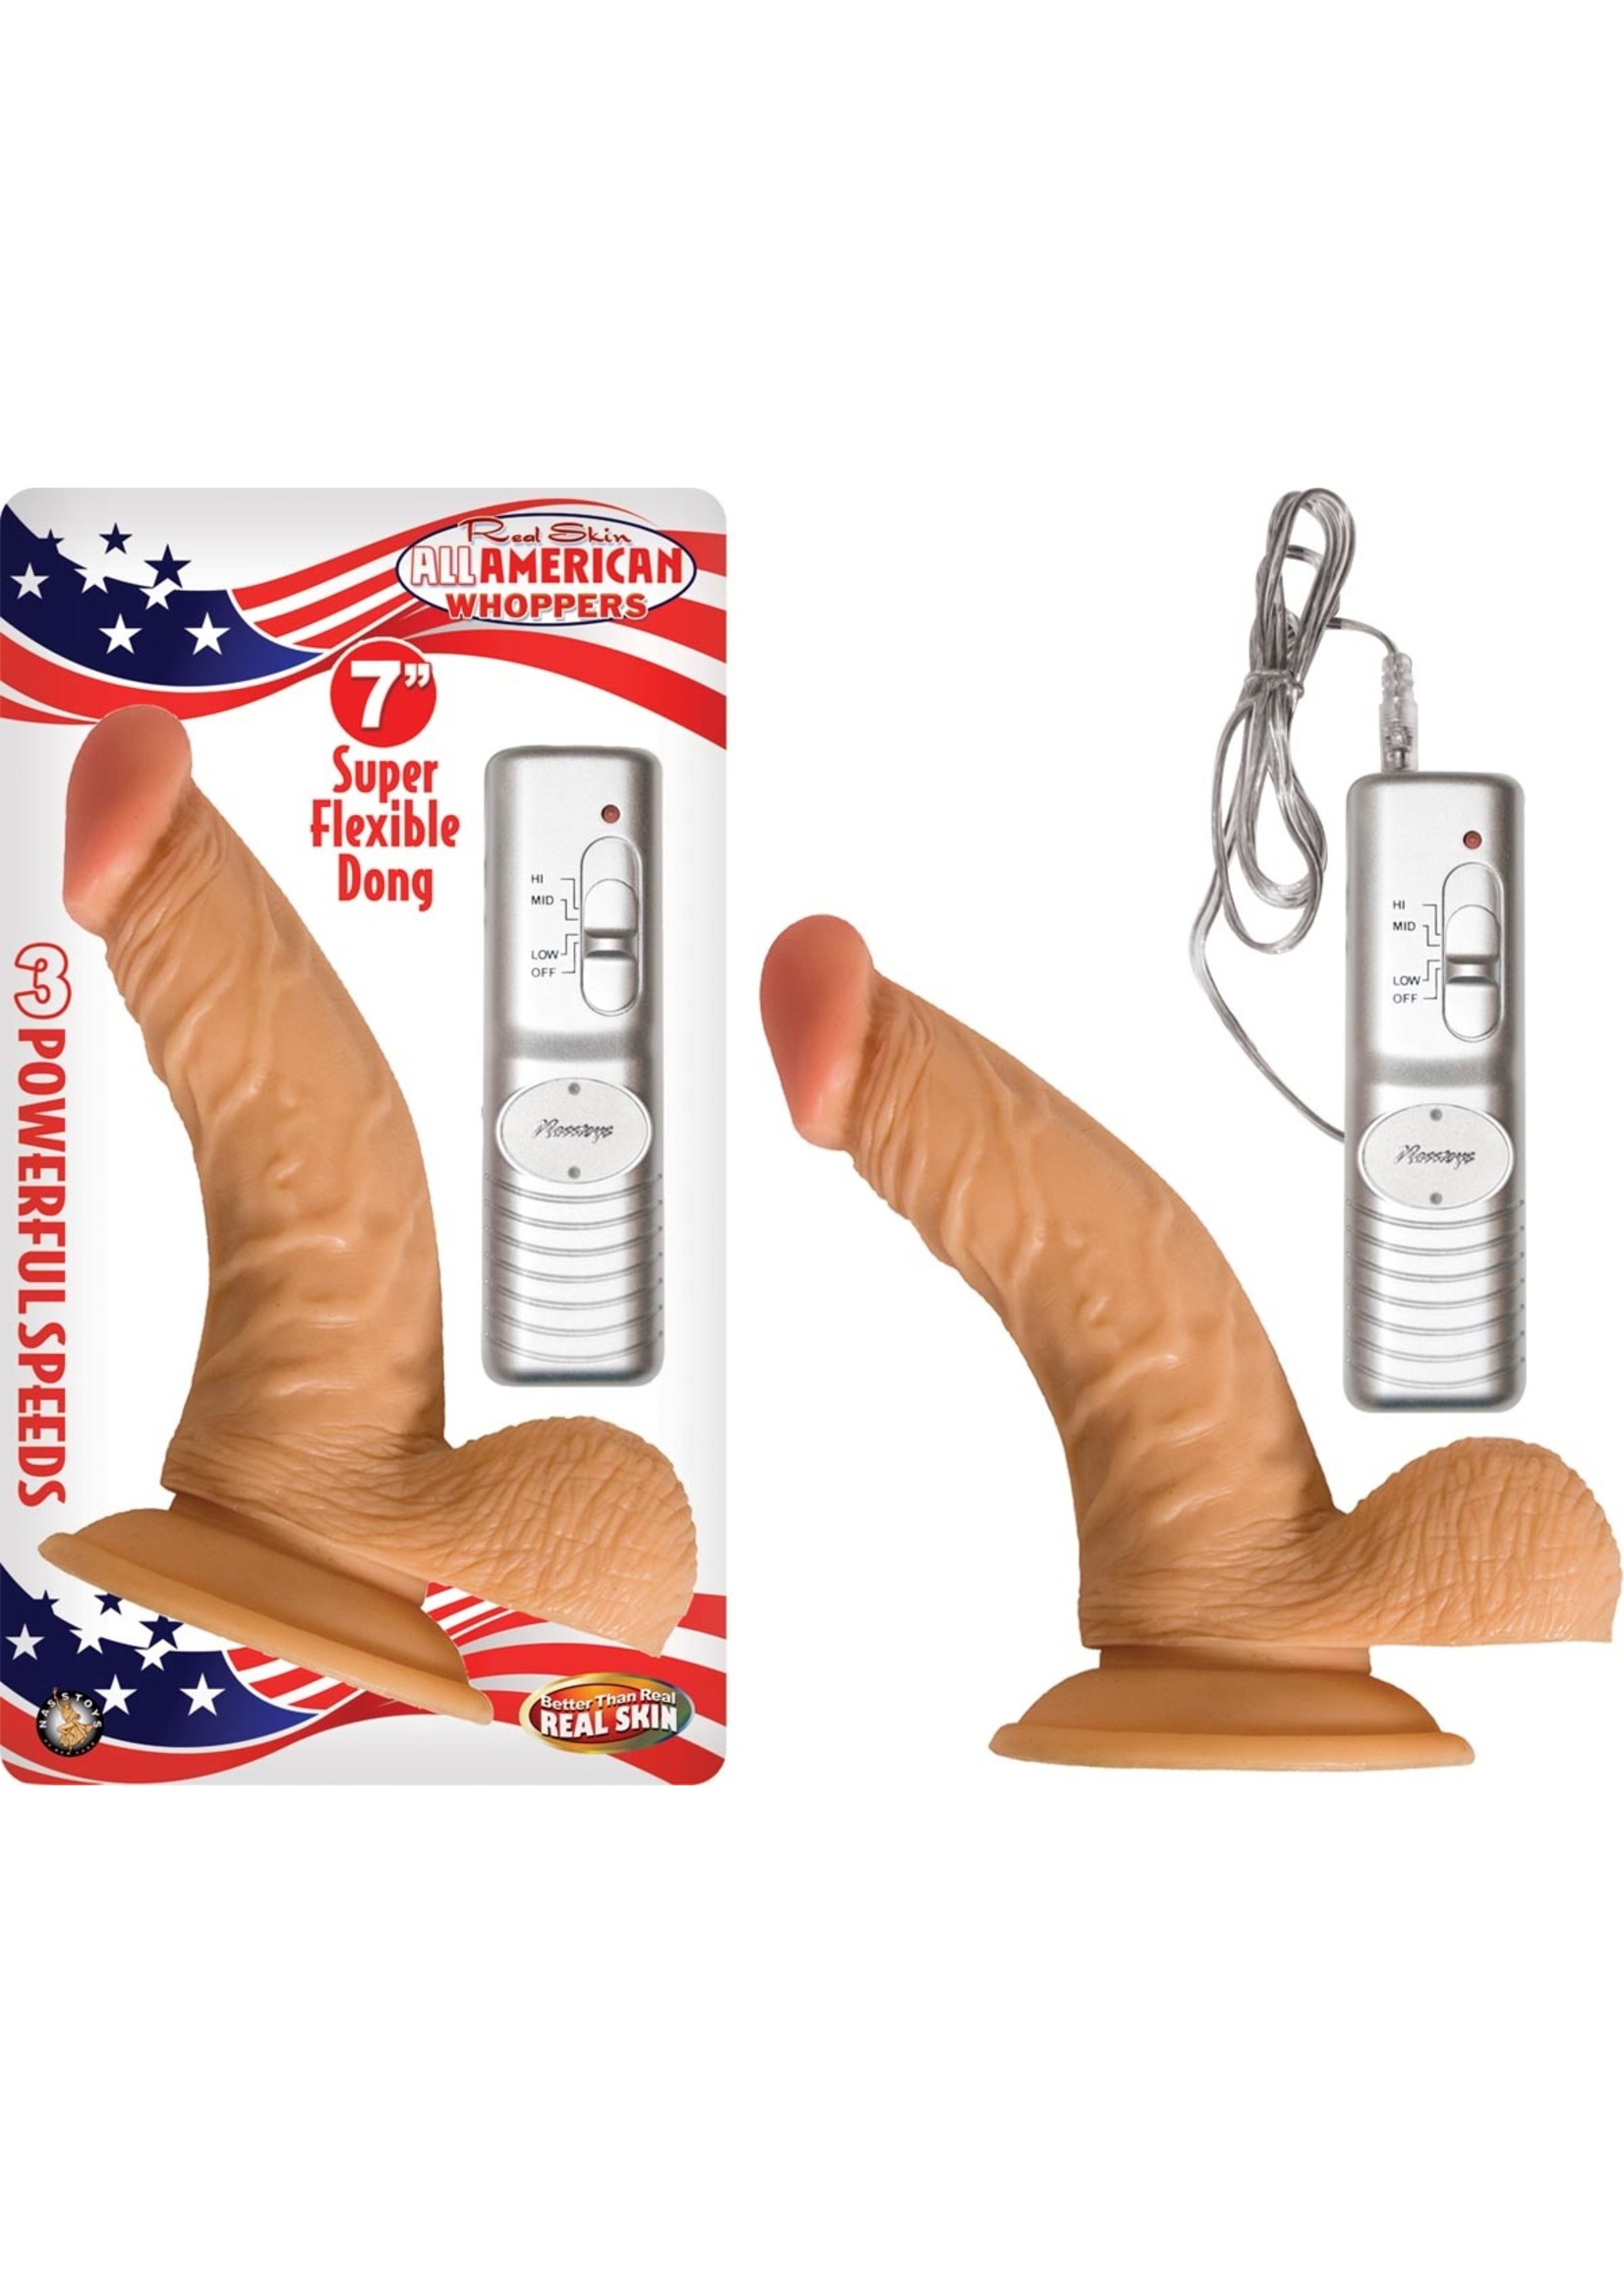 Nasstoys Real Skin All American Whippers Vibrating Dong With Balls 7 Inch Flesh